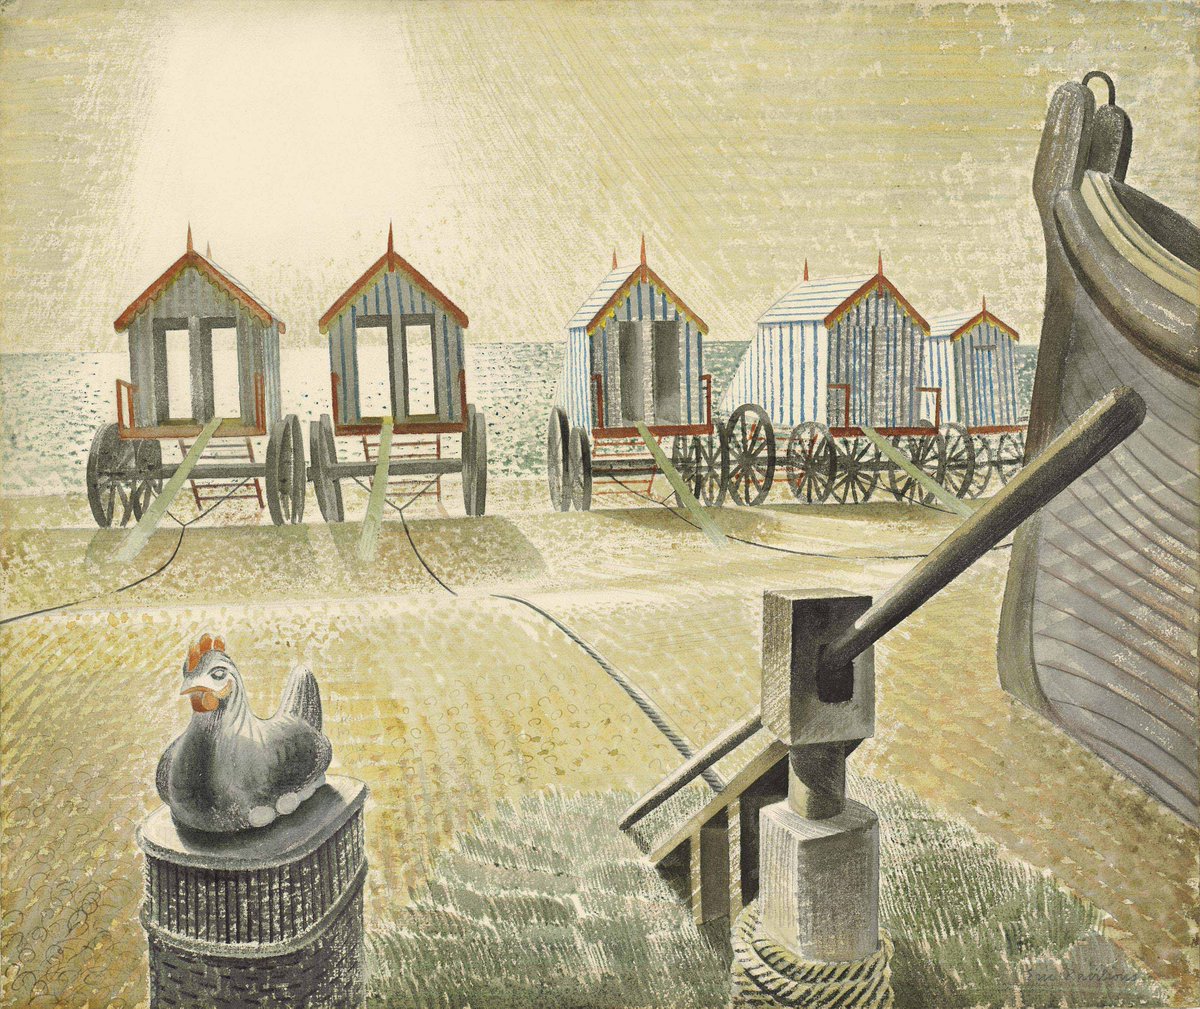 Bathing Machines, Eric Ravilious, 1938. This is one of a series depicting Aldeburgh beach in #Suffolk. The original artwork is in the collection of @TownerGallery. (The Hen is a vending machine!)